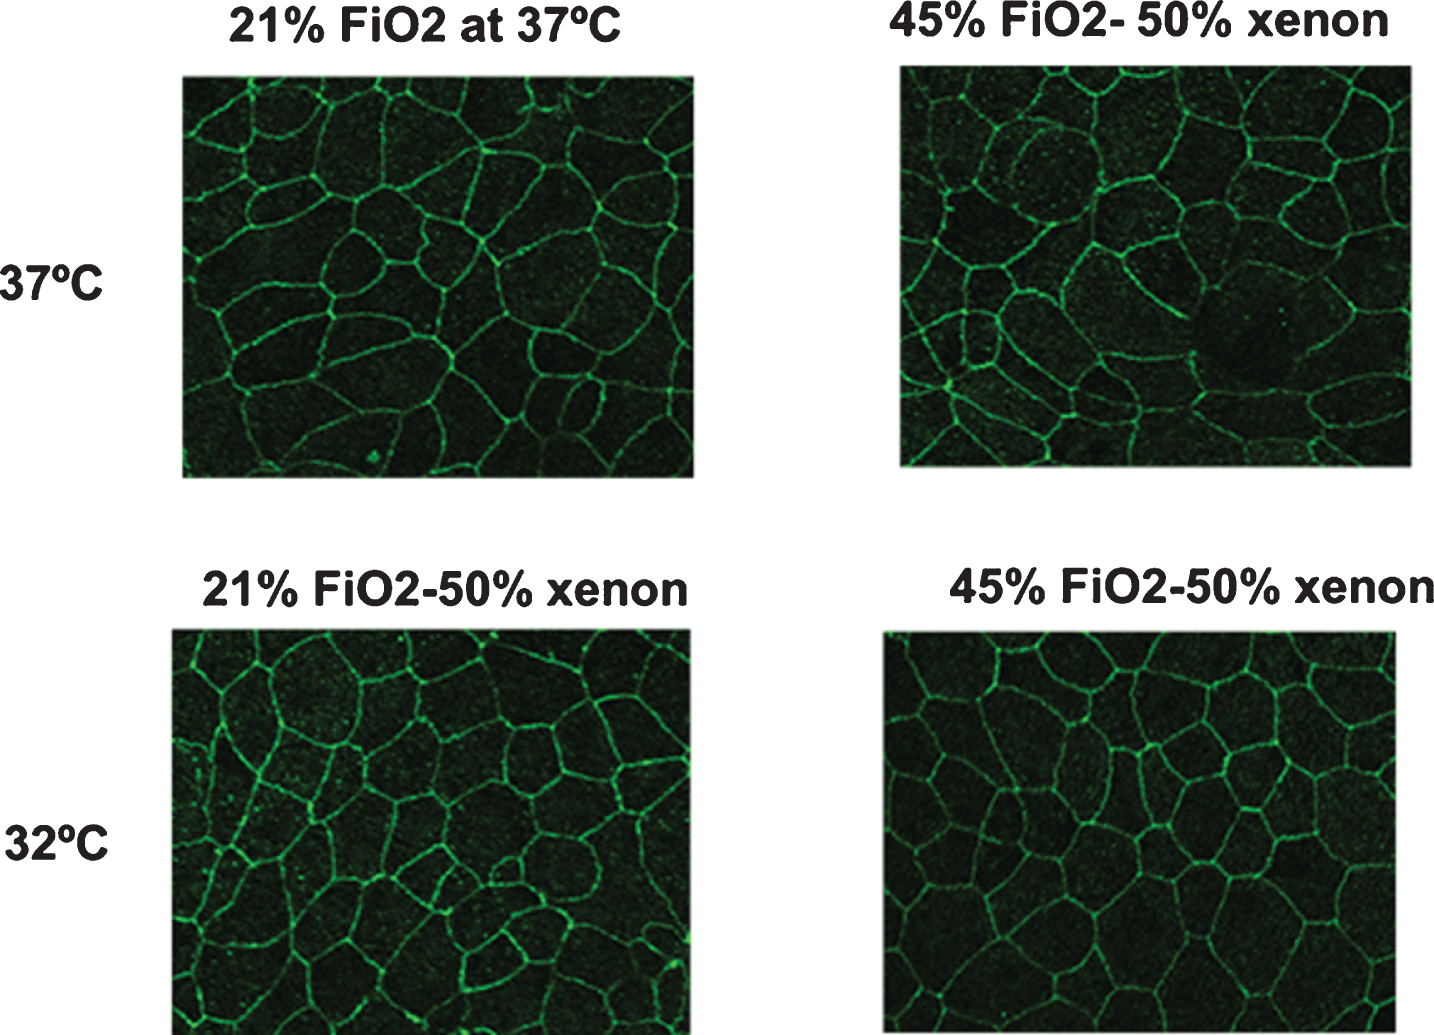 Representative tight junction images. Immunofluorescence localization of ZO-1 (XY) showed reduced density of the ZO-1 rings and the incomplete ring-like staining in the 45% FiO2-50% xenon group at 32°C compared with other groups. The intensity of the cytoplasm in this group was greater than that in the other groups.